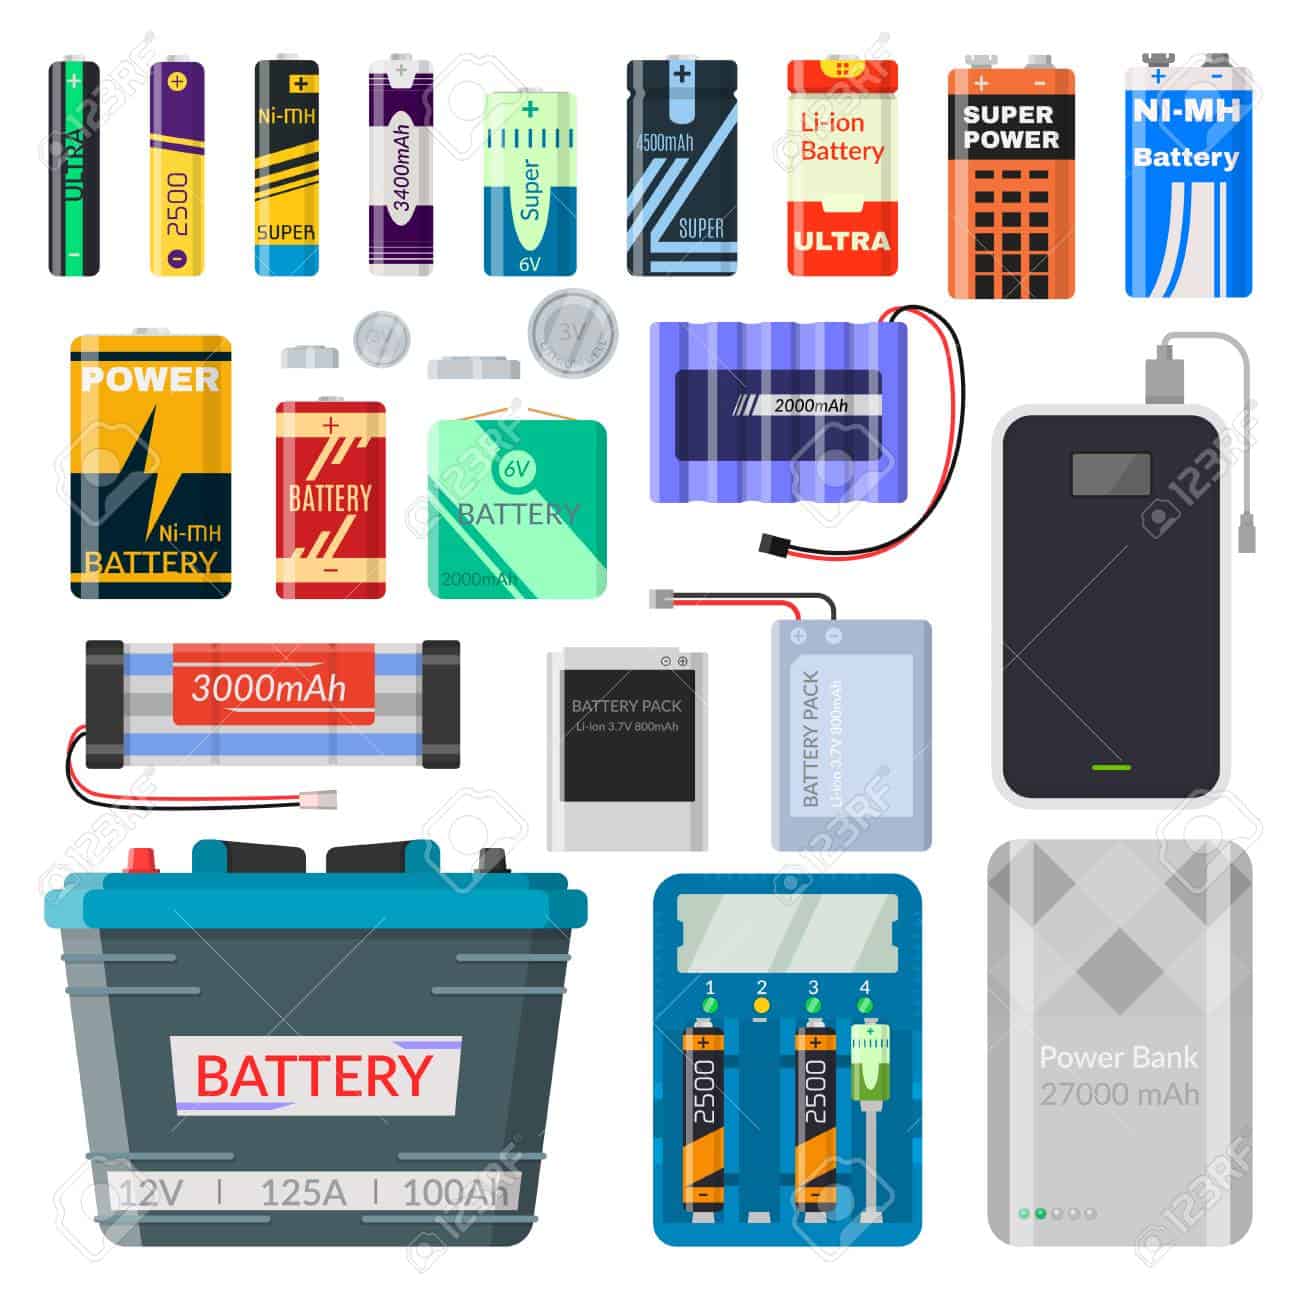 Check out the best Batteries for Off-Grid Projects